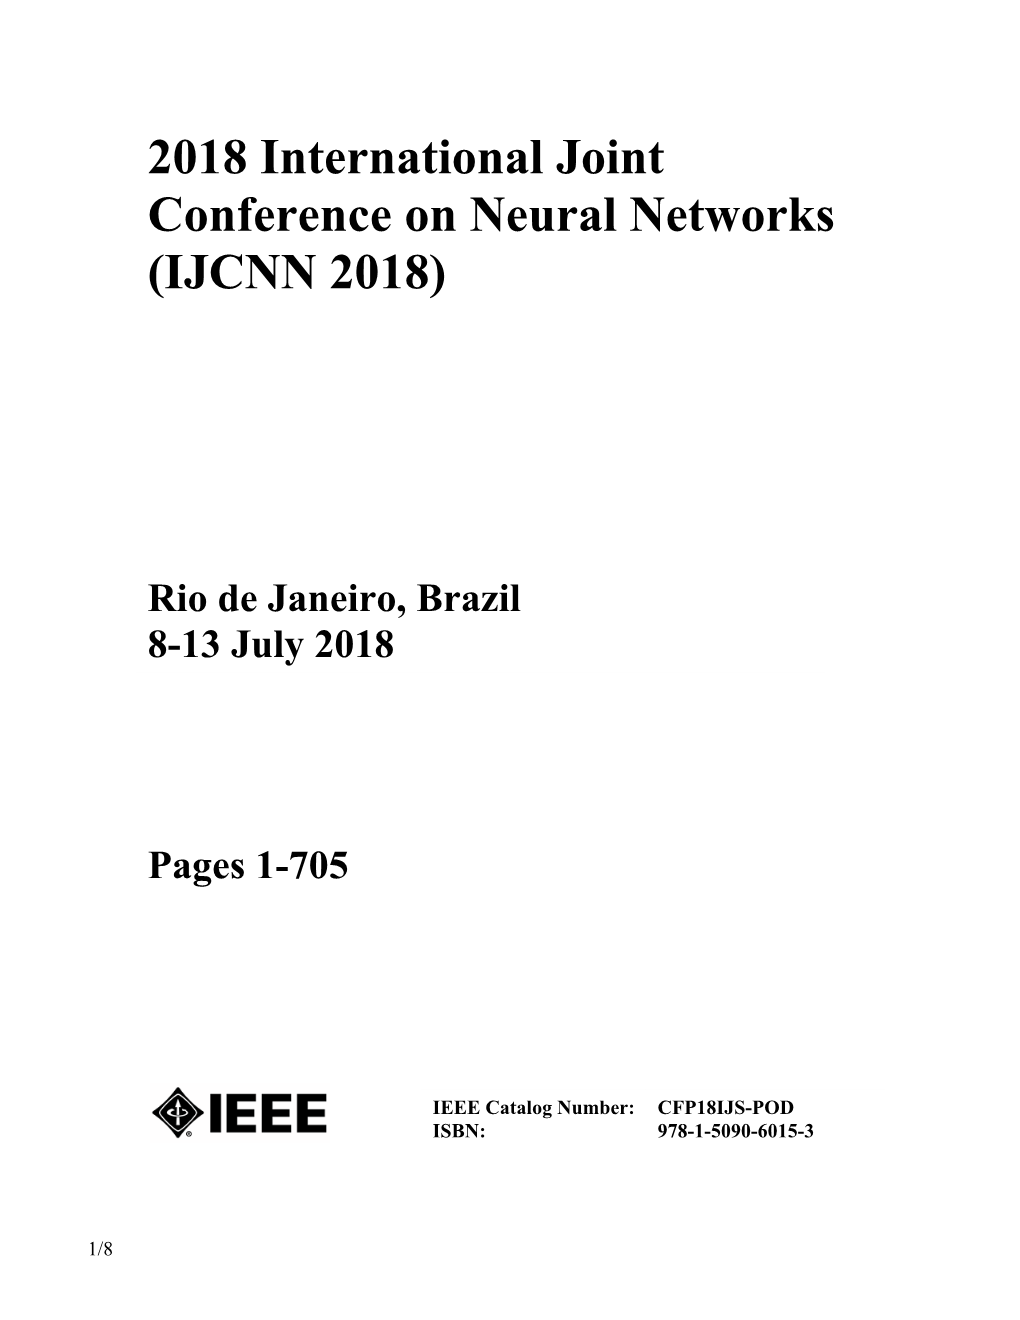 2018 International Joint Conference on Neural Networks (IJCNN 2018)